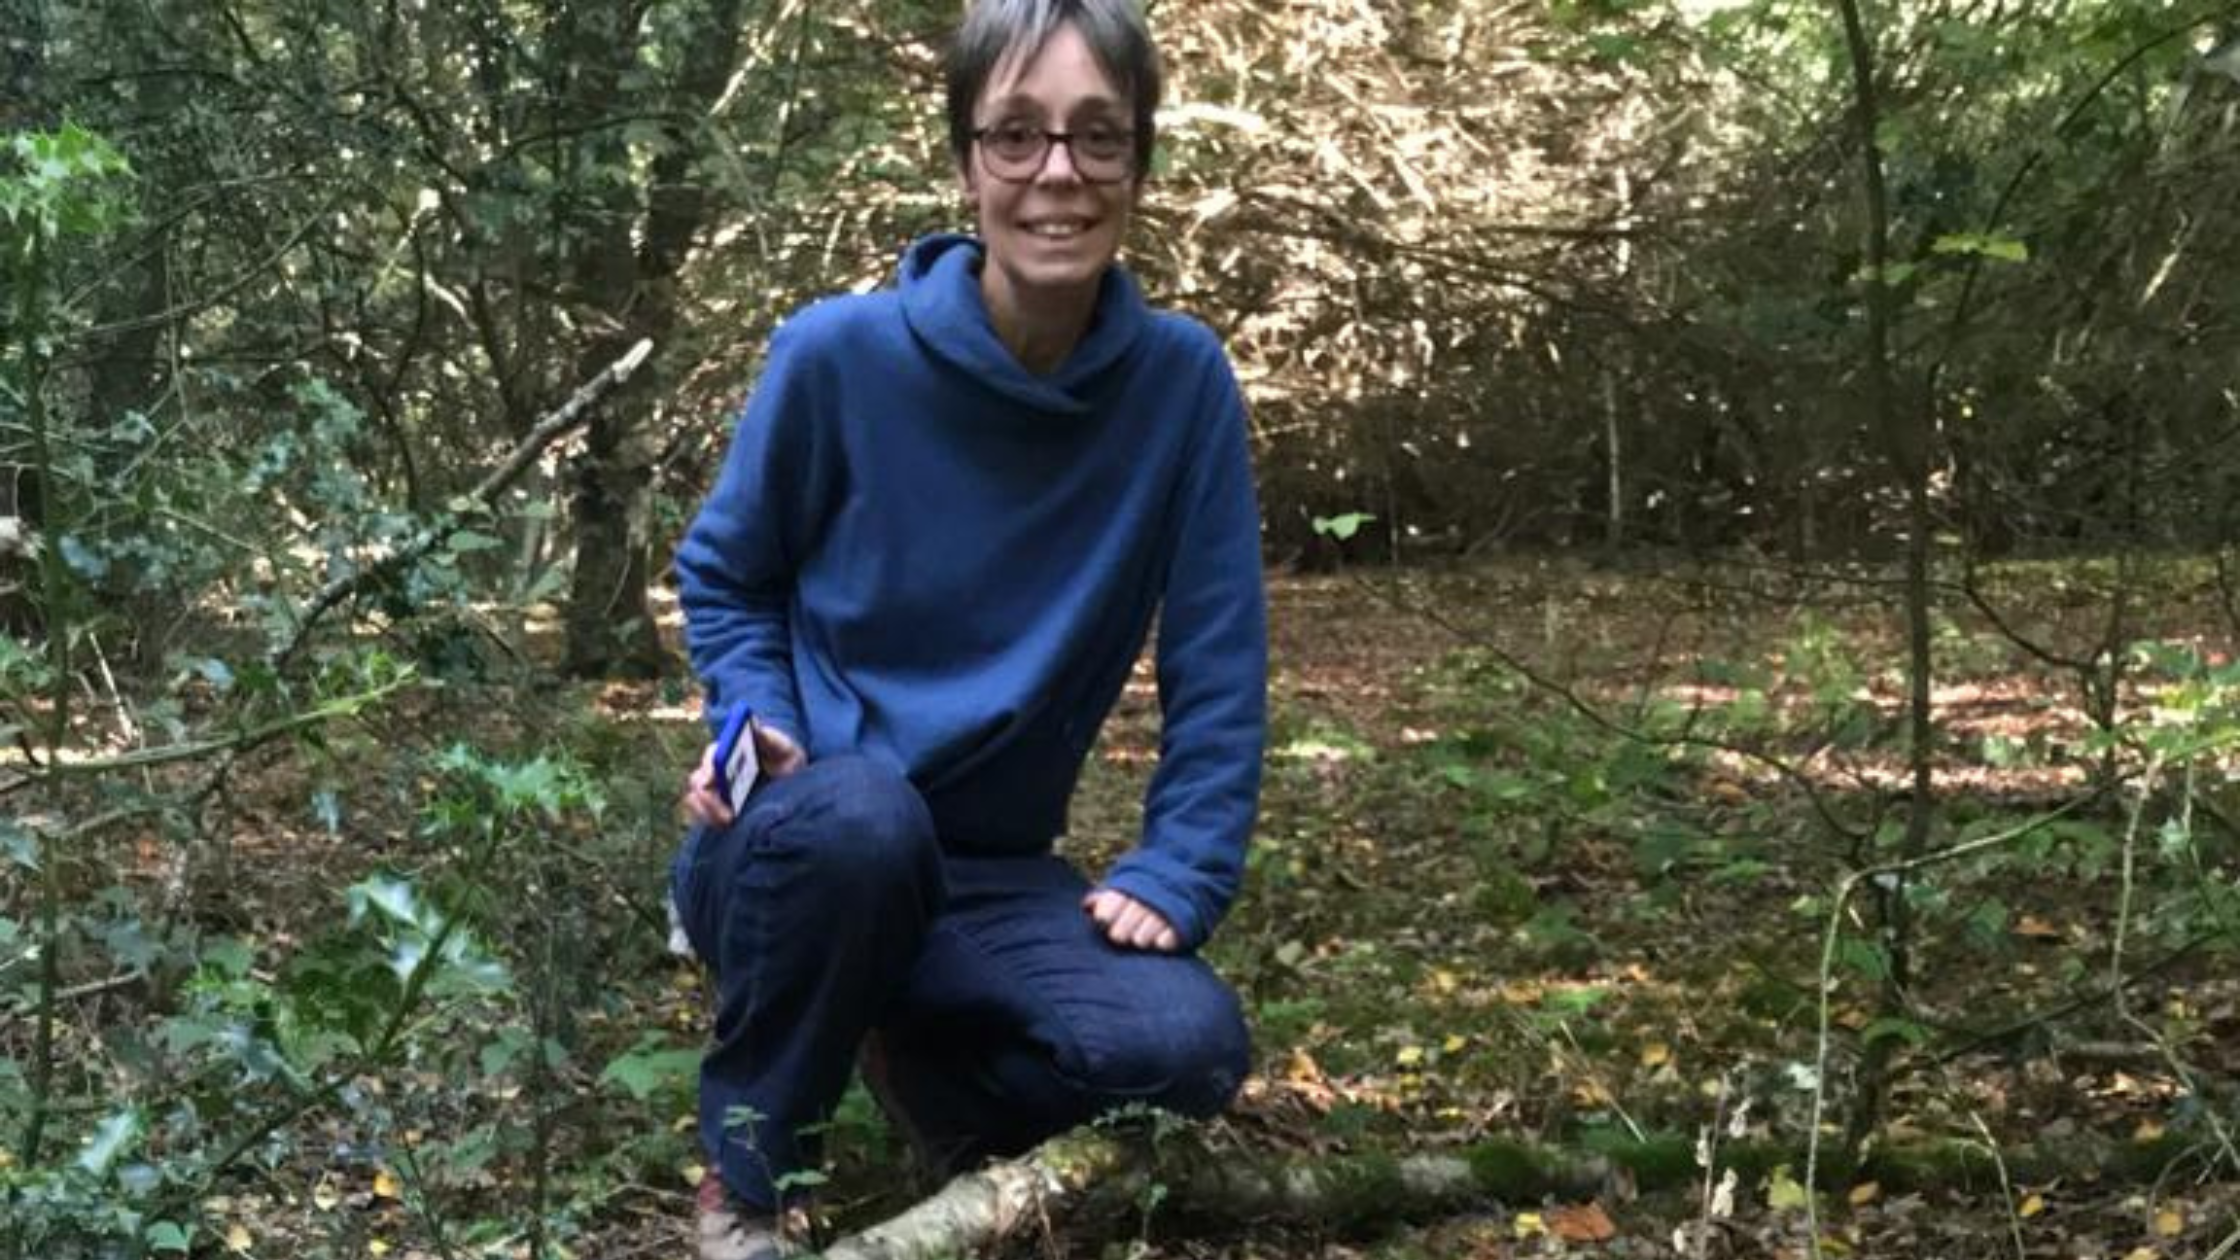 Image of Jacquetta Fewster, Coordination Officer at the Surrey Climate Commission in a field of mushrooms